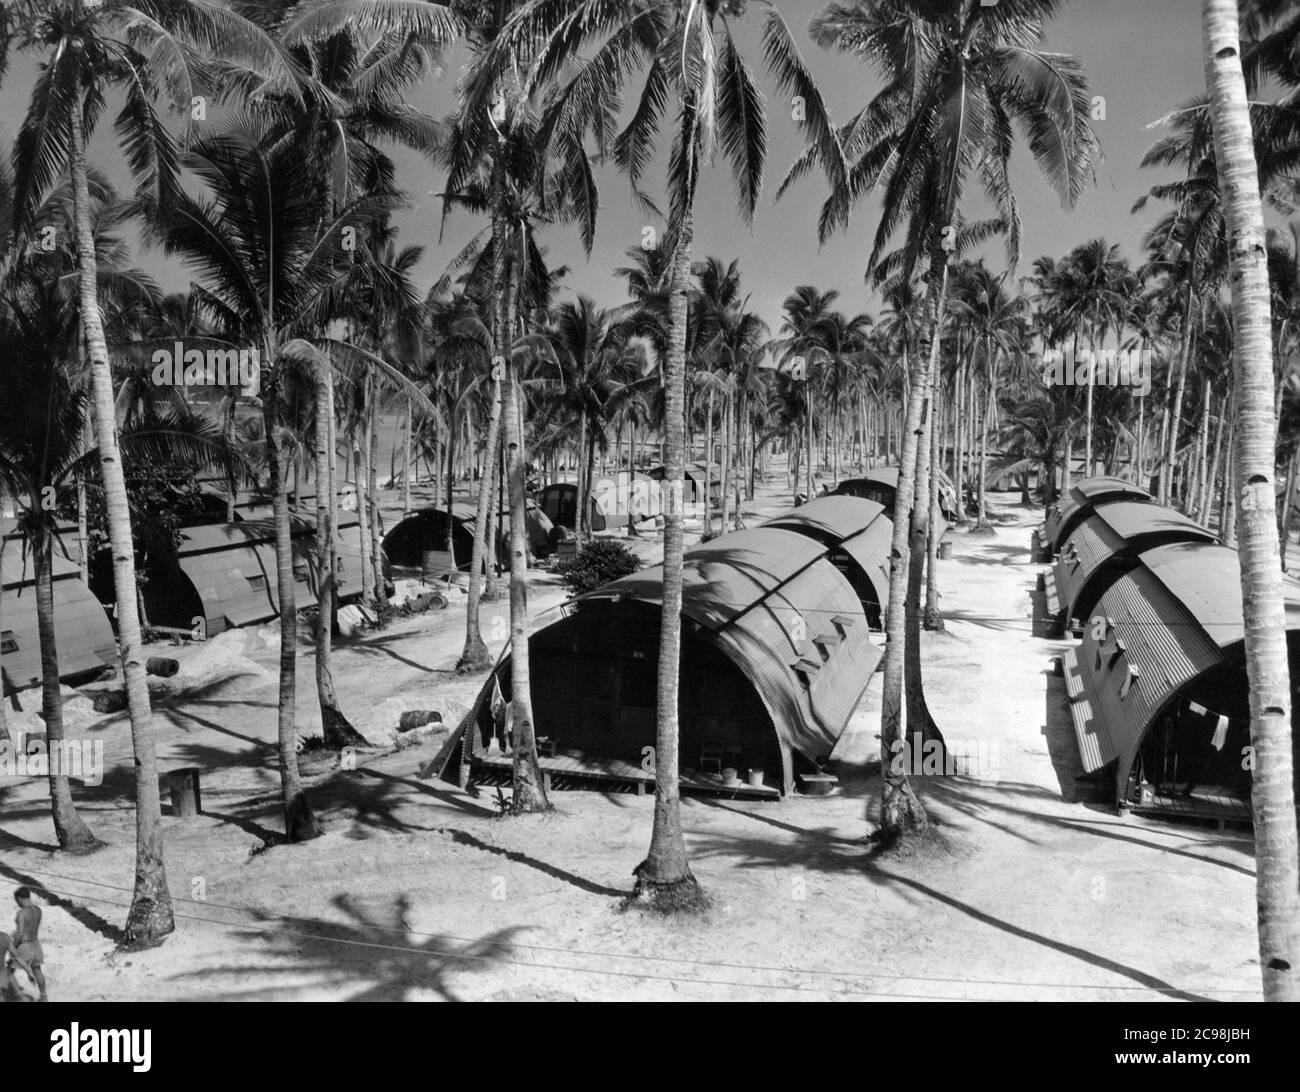 Quonset huts on the beach. Camp Dealey Submarine Recuperation Camp. Guam, July 1945. As the 75th anniversary of V-J Day approaches, The Consoli Collection has published four photo essays by U.S. Navy Lt. (j.g.) Joseph J. Consoli. The photos were taken between July and December 1945 in the Mariana Islands. They document U.S. Navy life before and after the Japanese surrender. Stock Photo